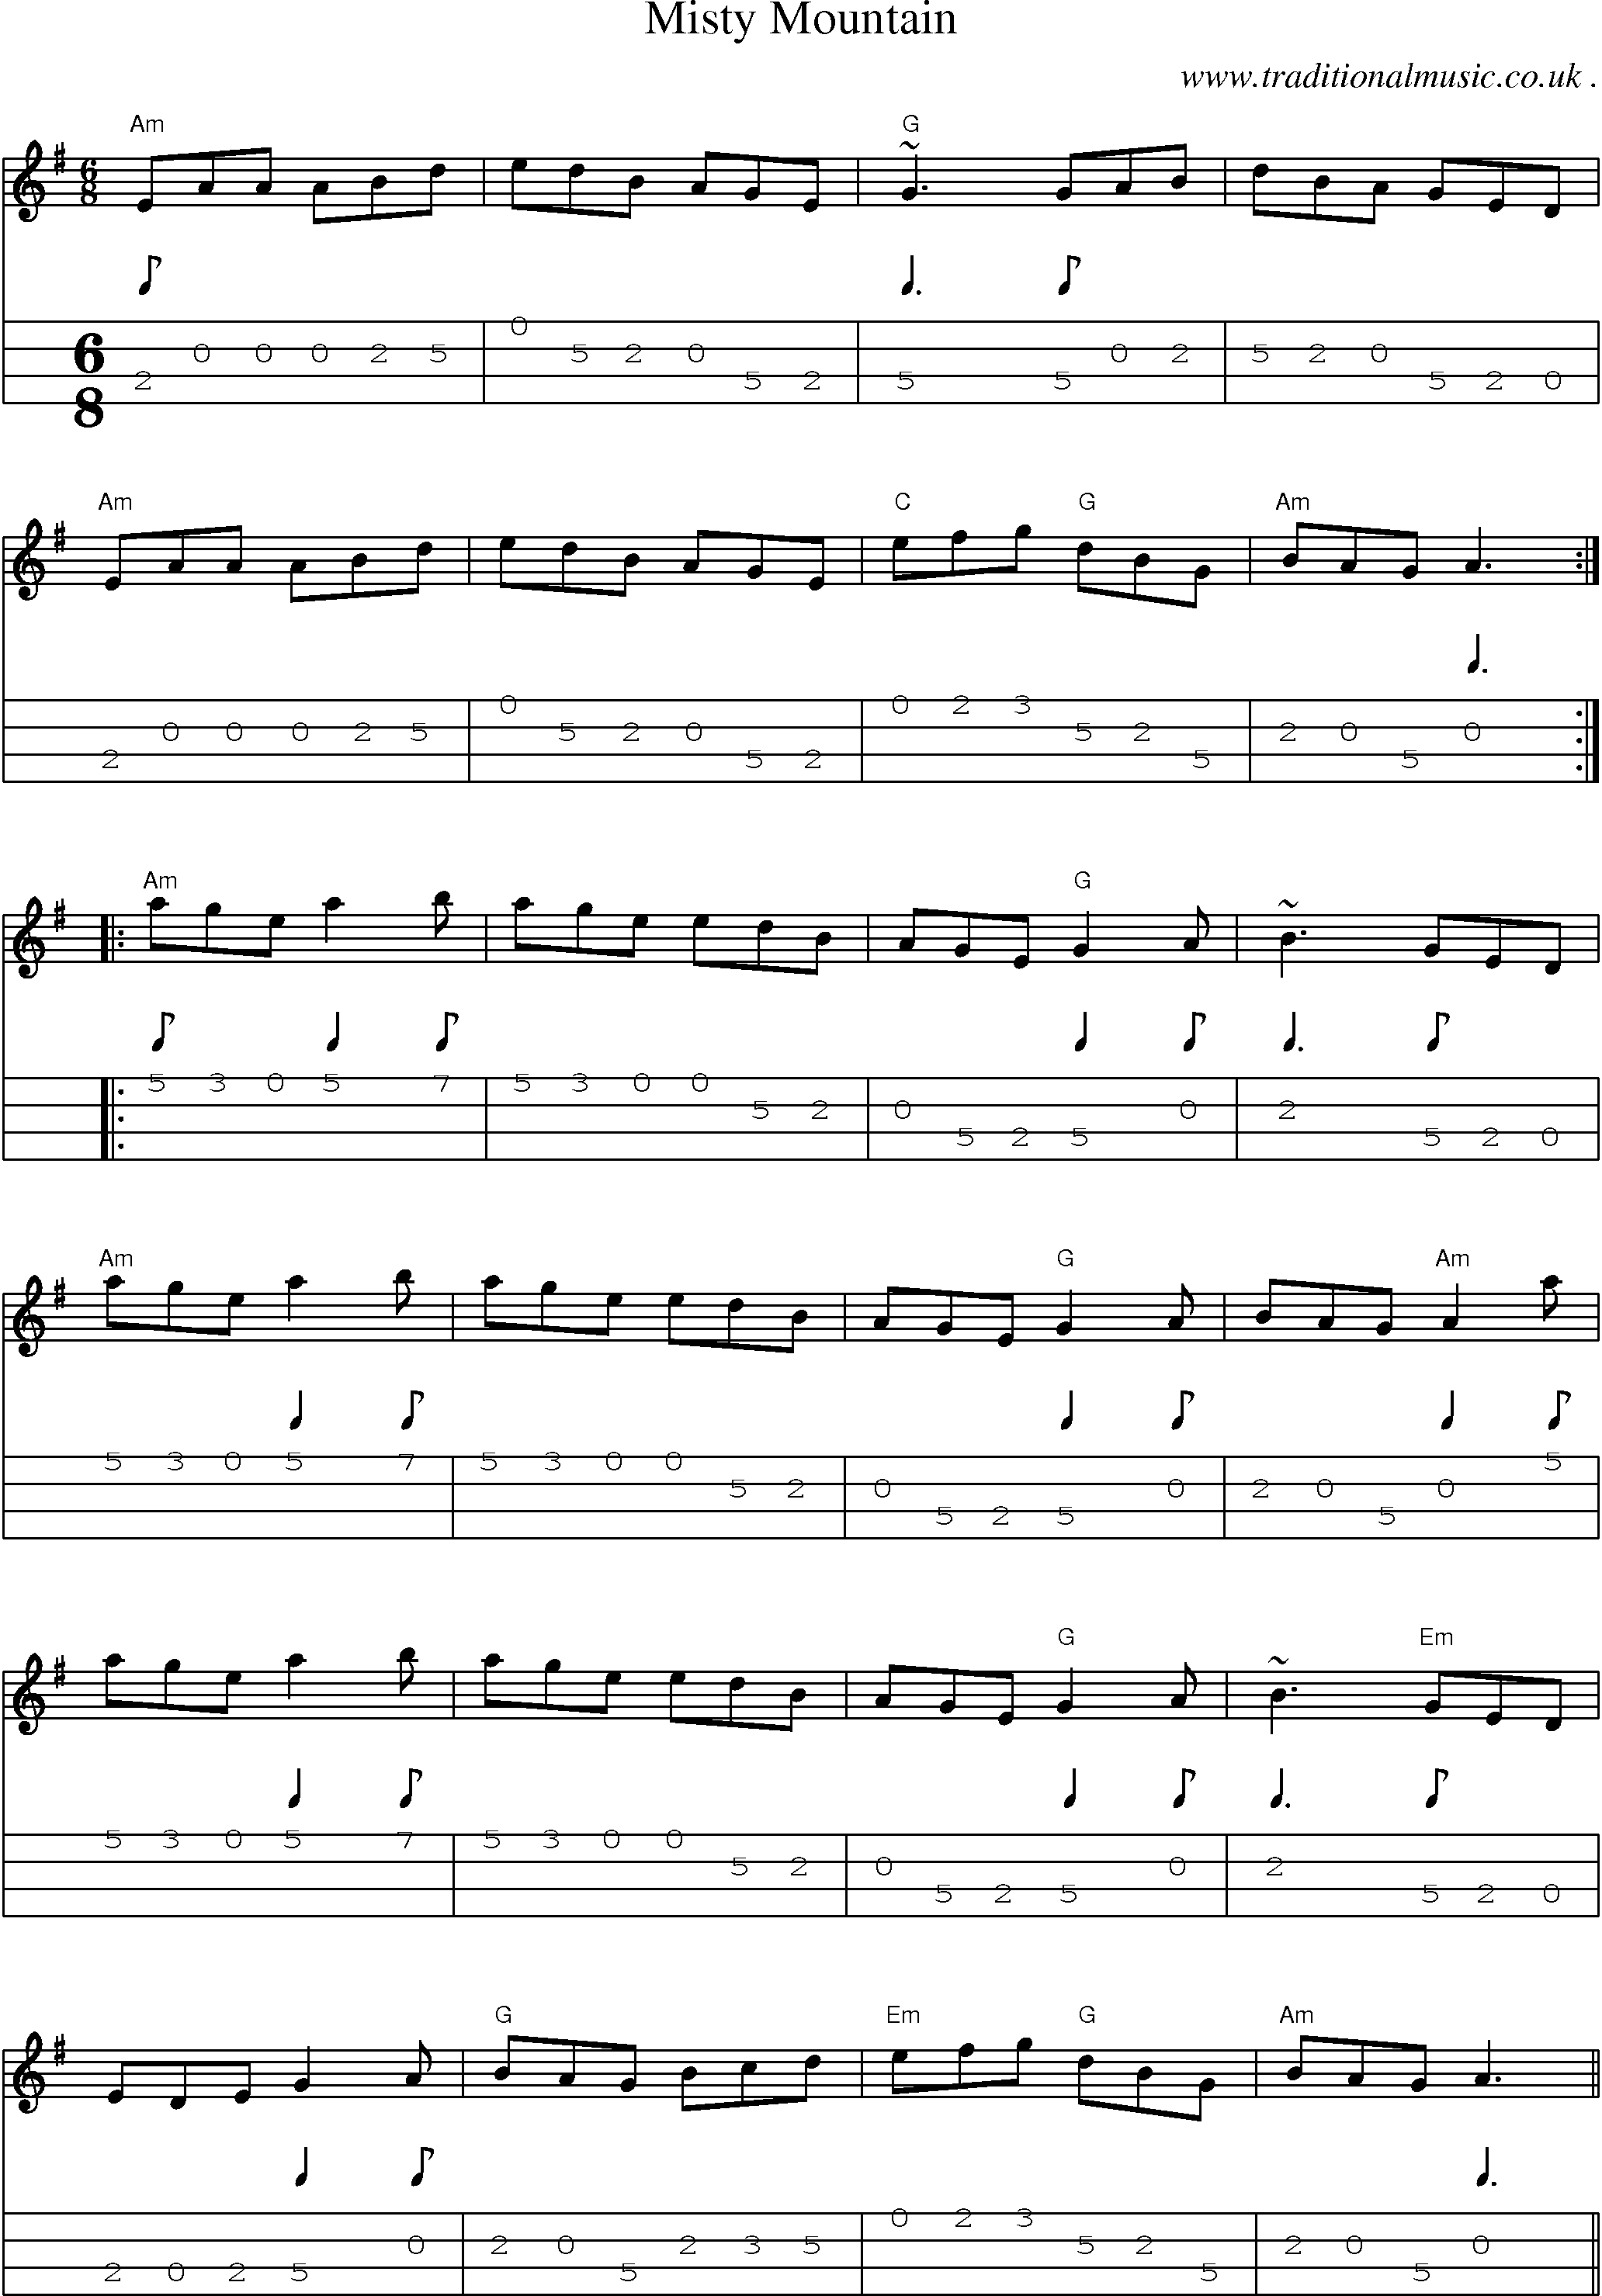 Music Score and Guitar Tabs for Misty Mountain